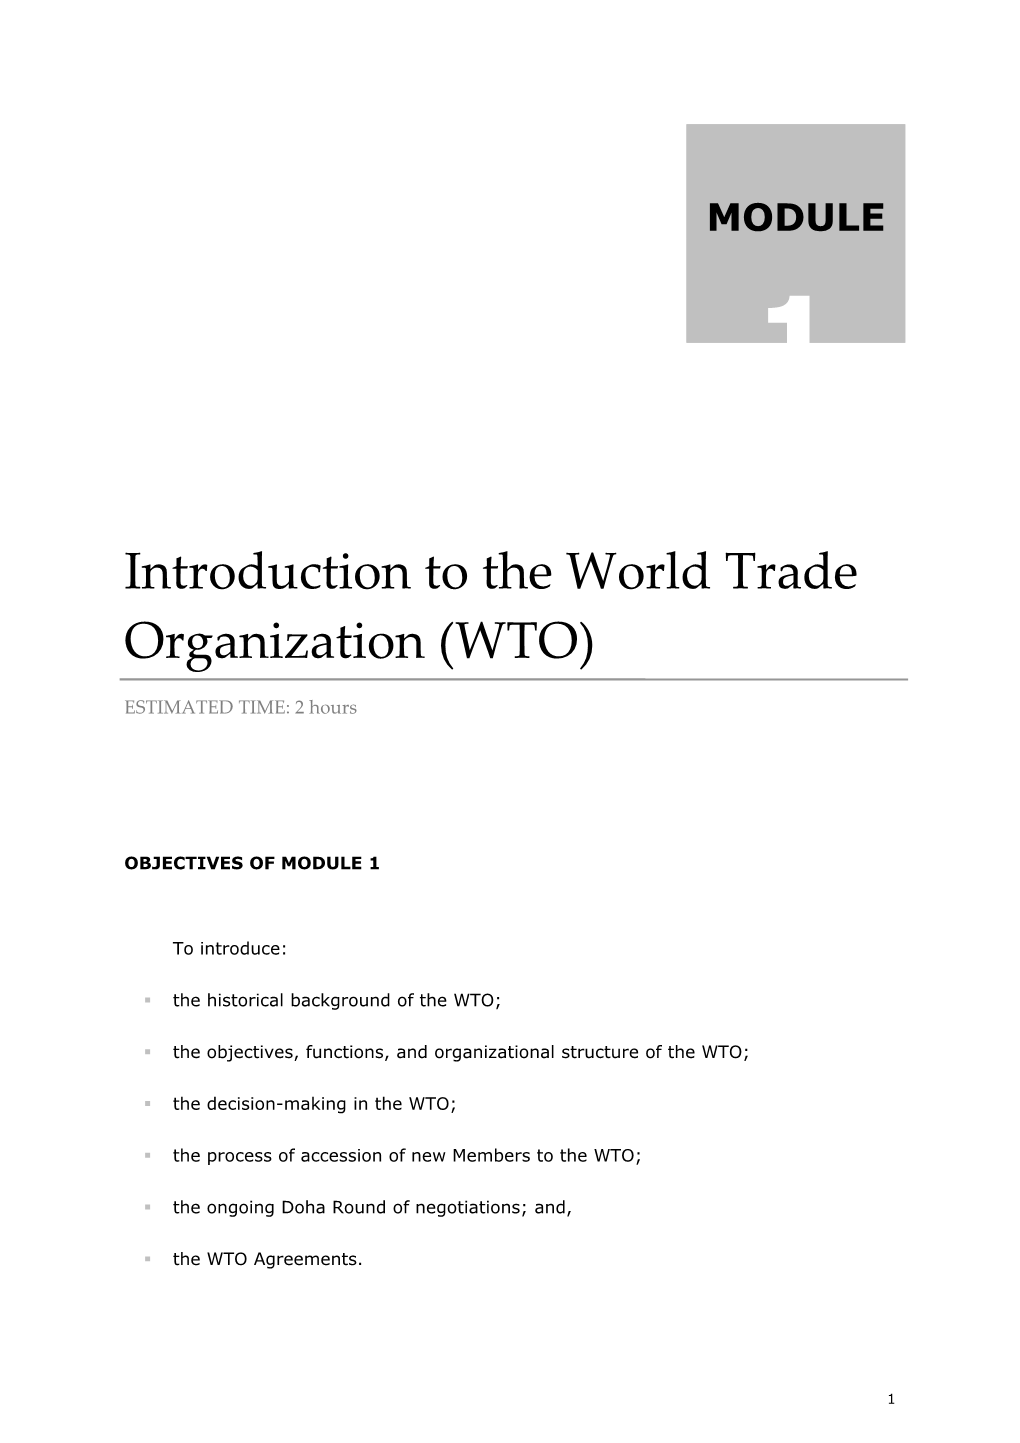 Introduction to the World Trade Organization (WTO)